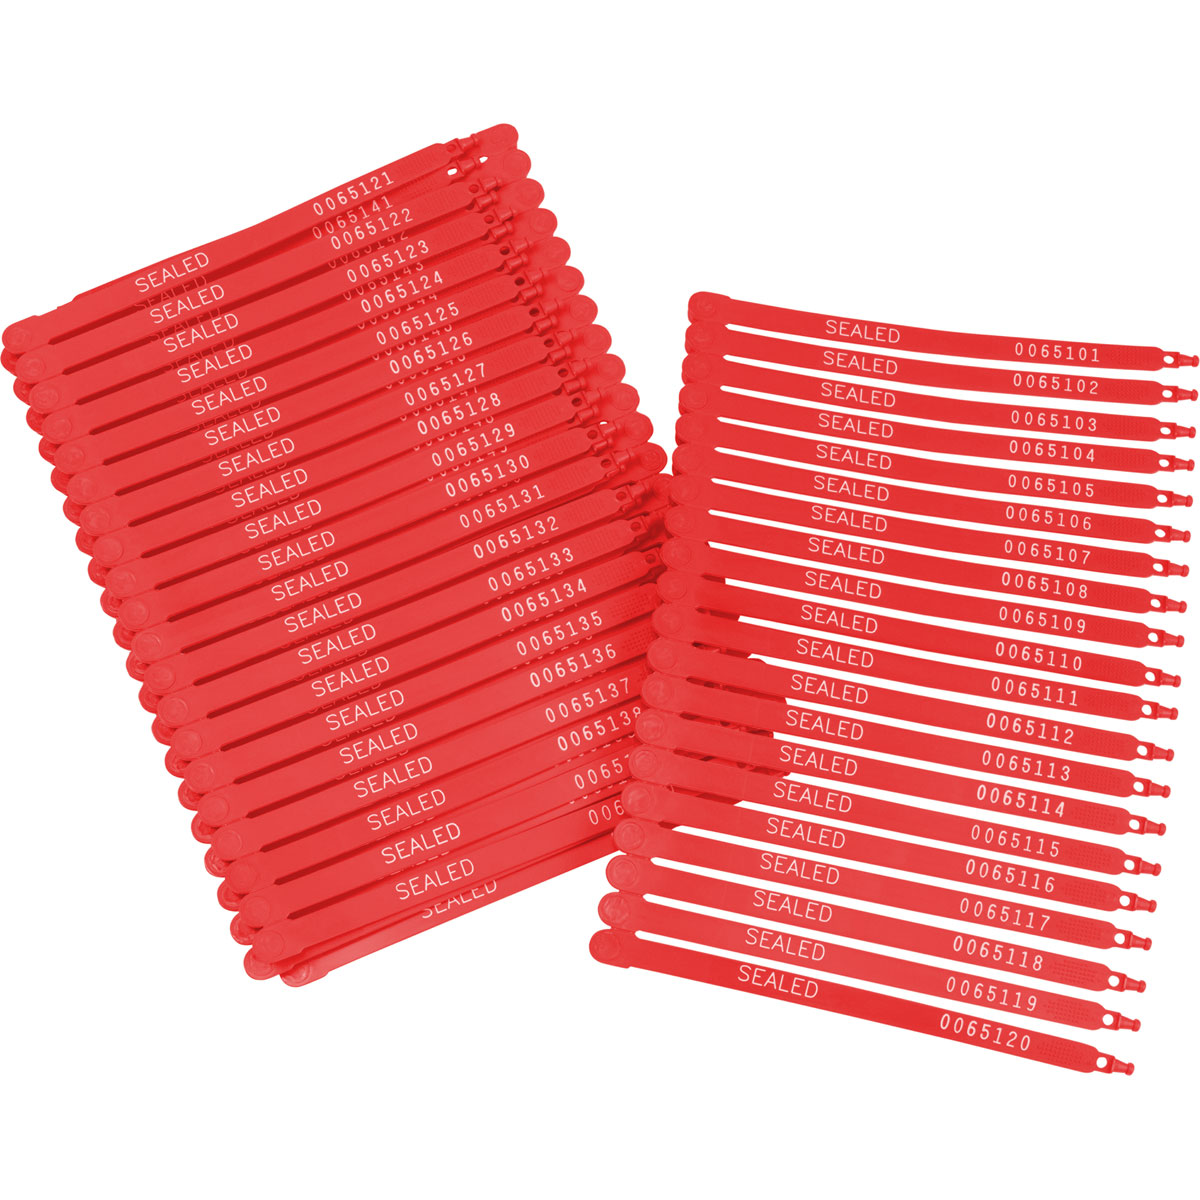 TRUCK SEALS 7.5" RED 100/PACK